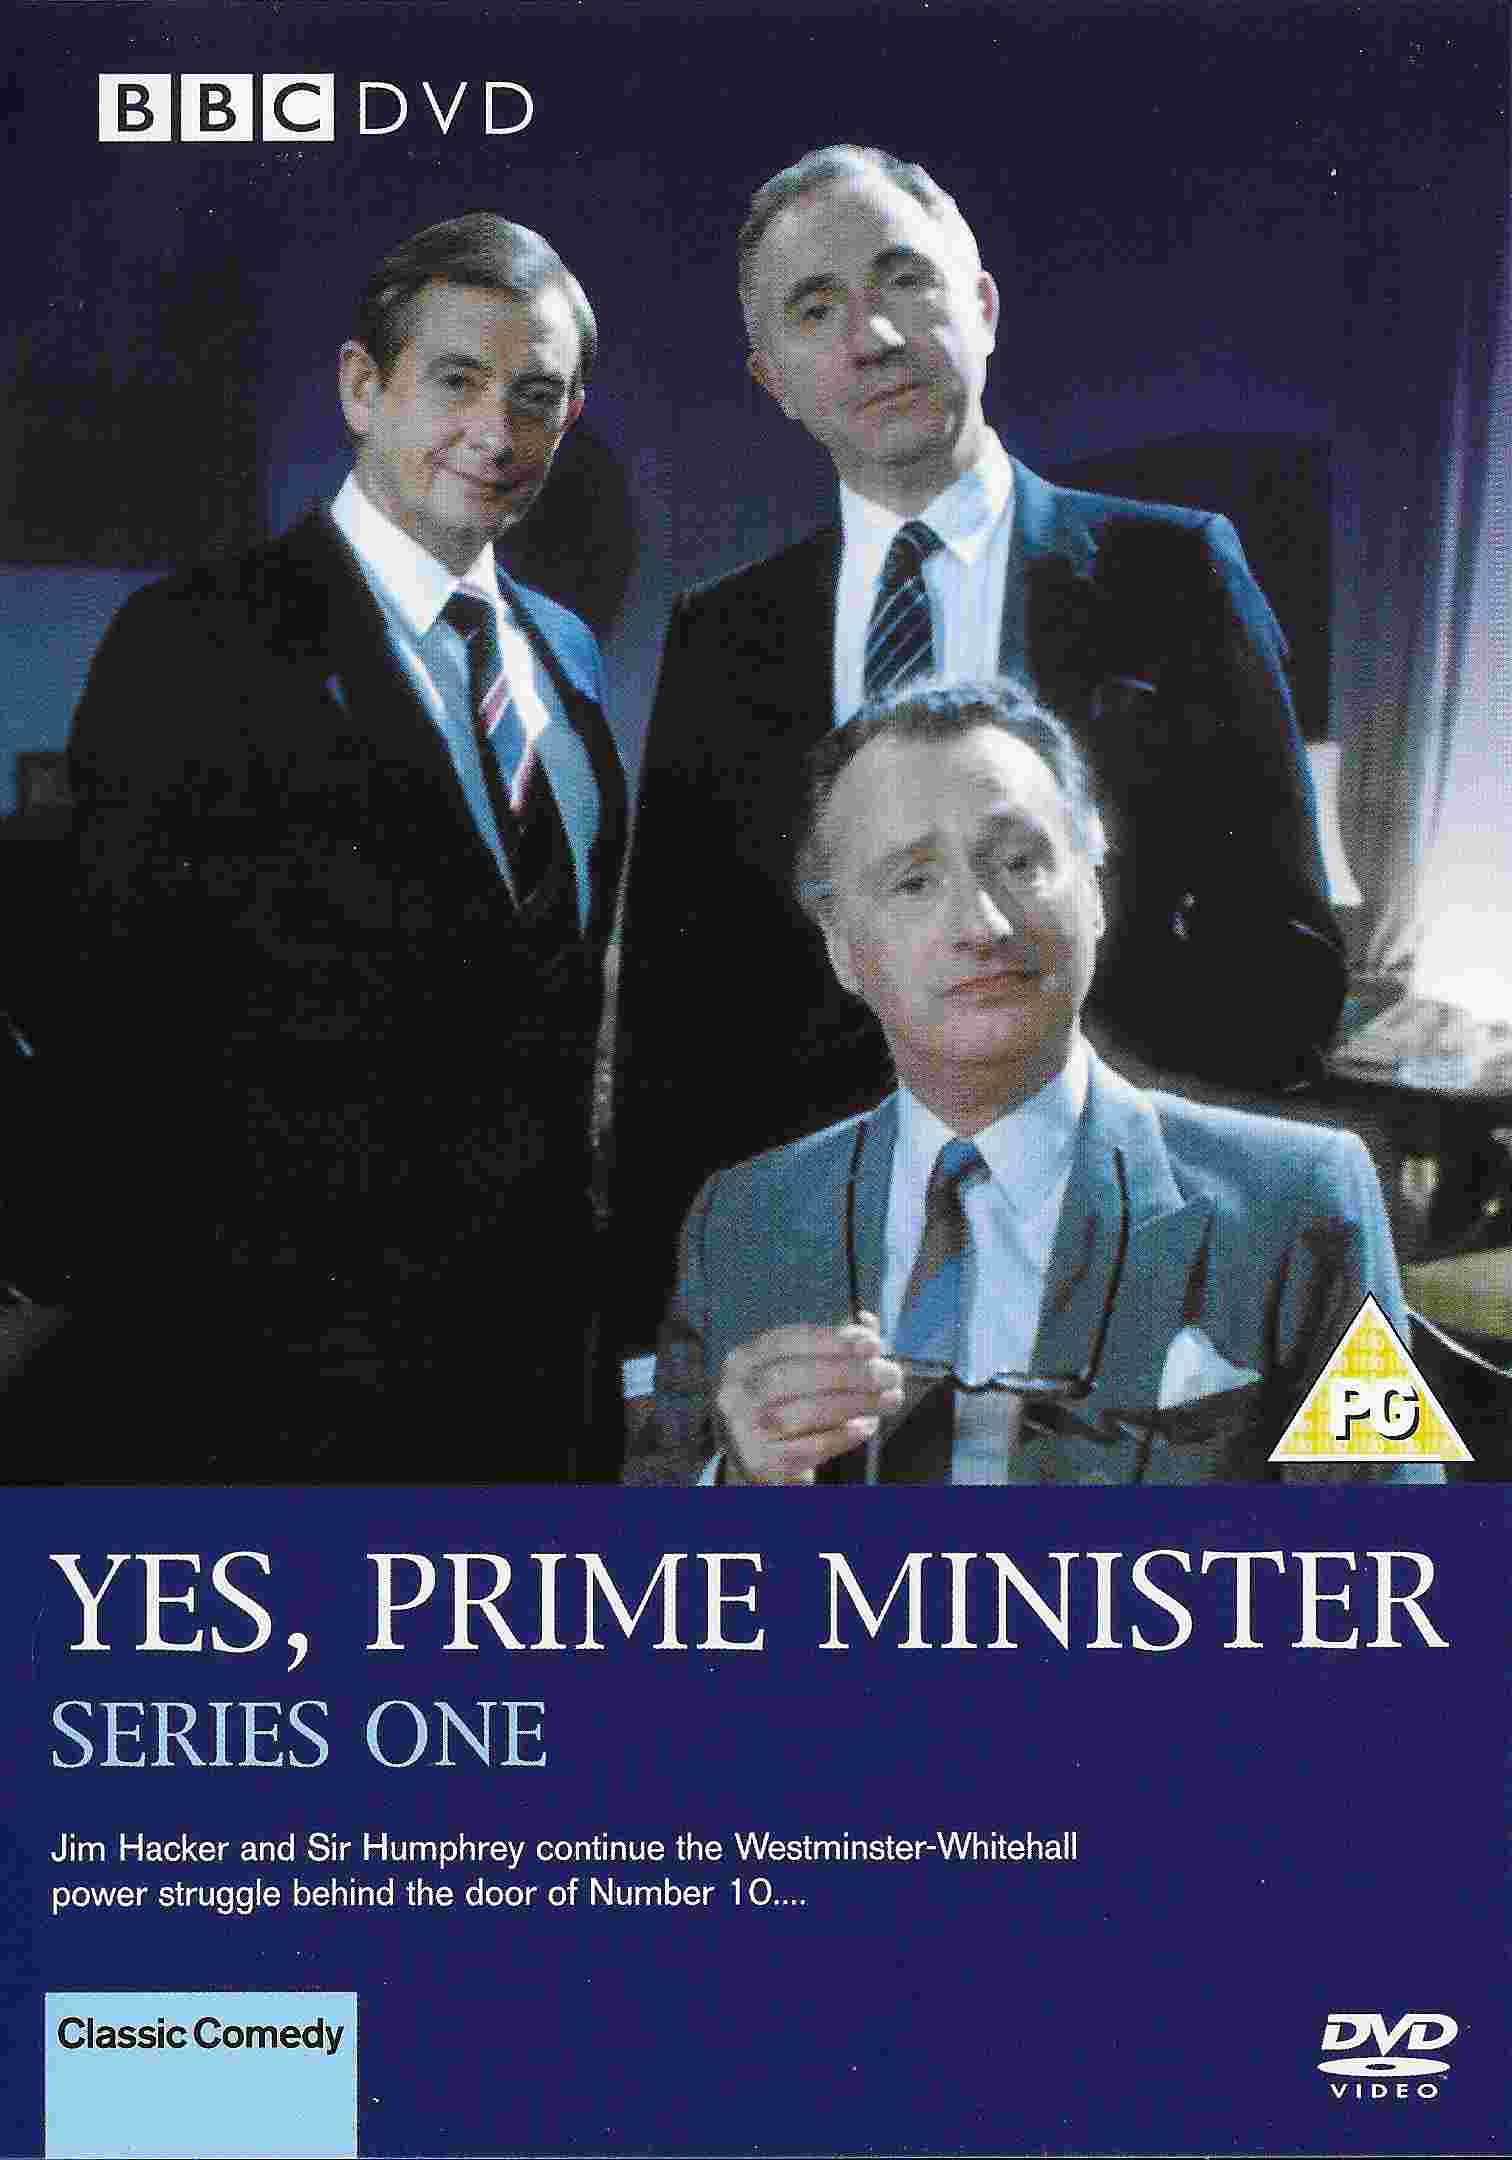 Picture of BBCDVD 1365 Yes, Prime Minister - Series One by artist Antony Jay / Jonathan Lynn from the BBC dvds - Records and Tapes library